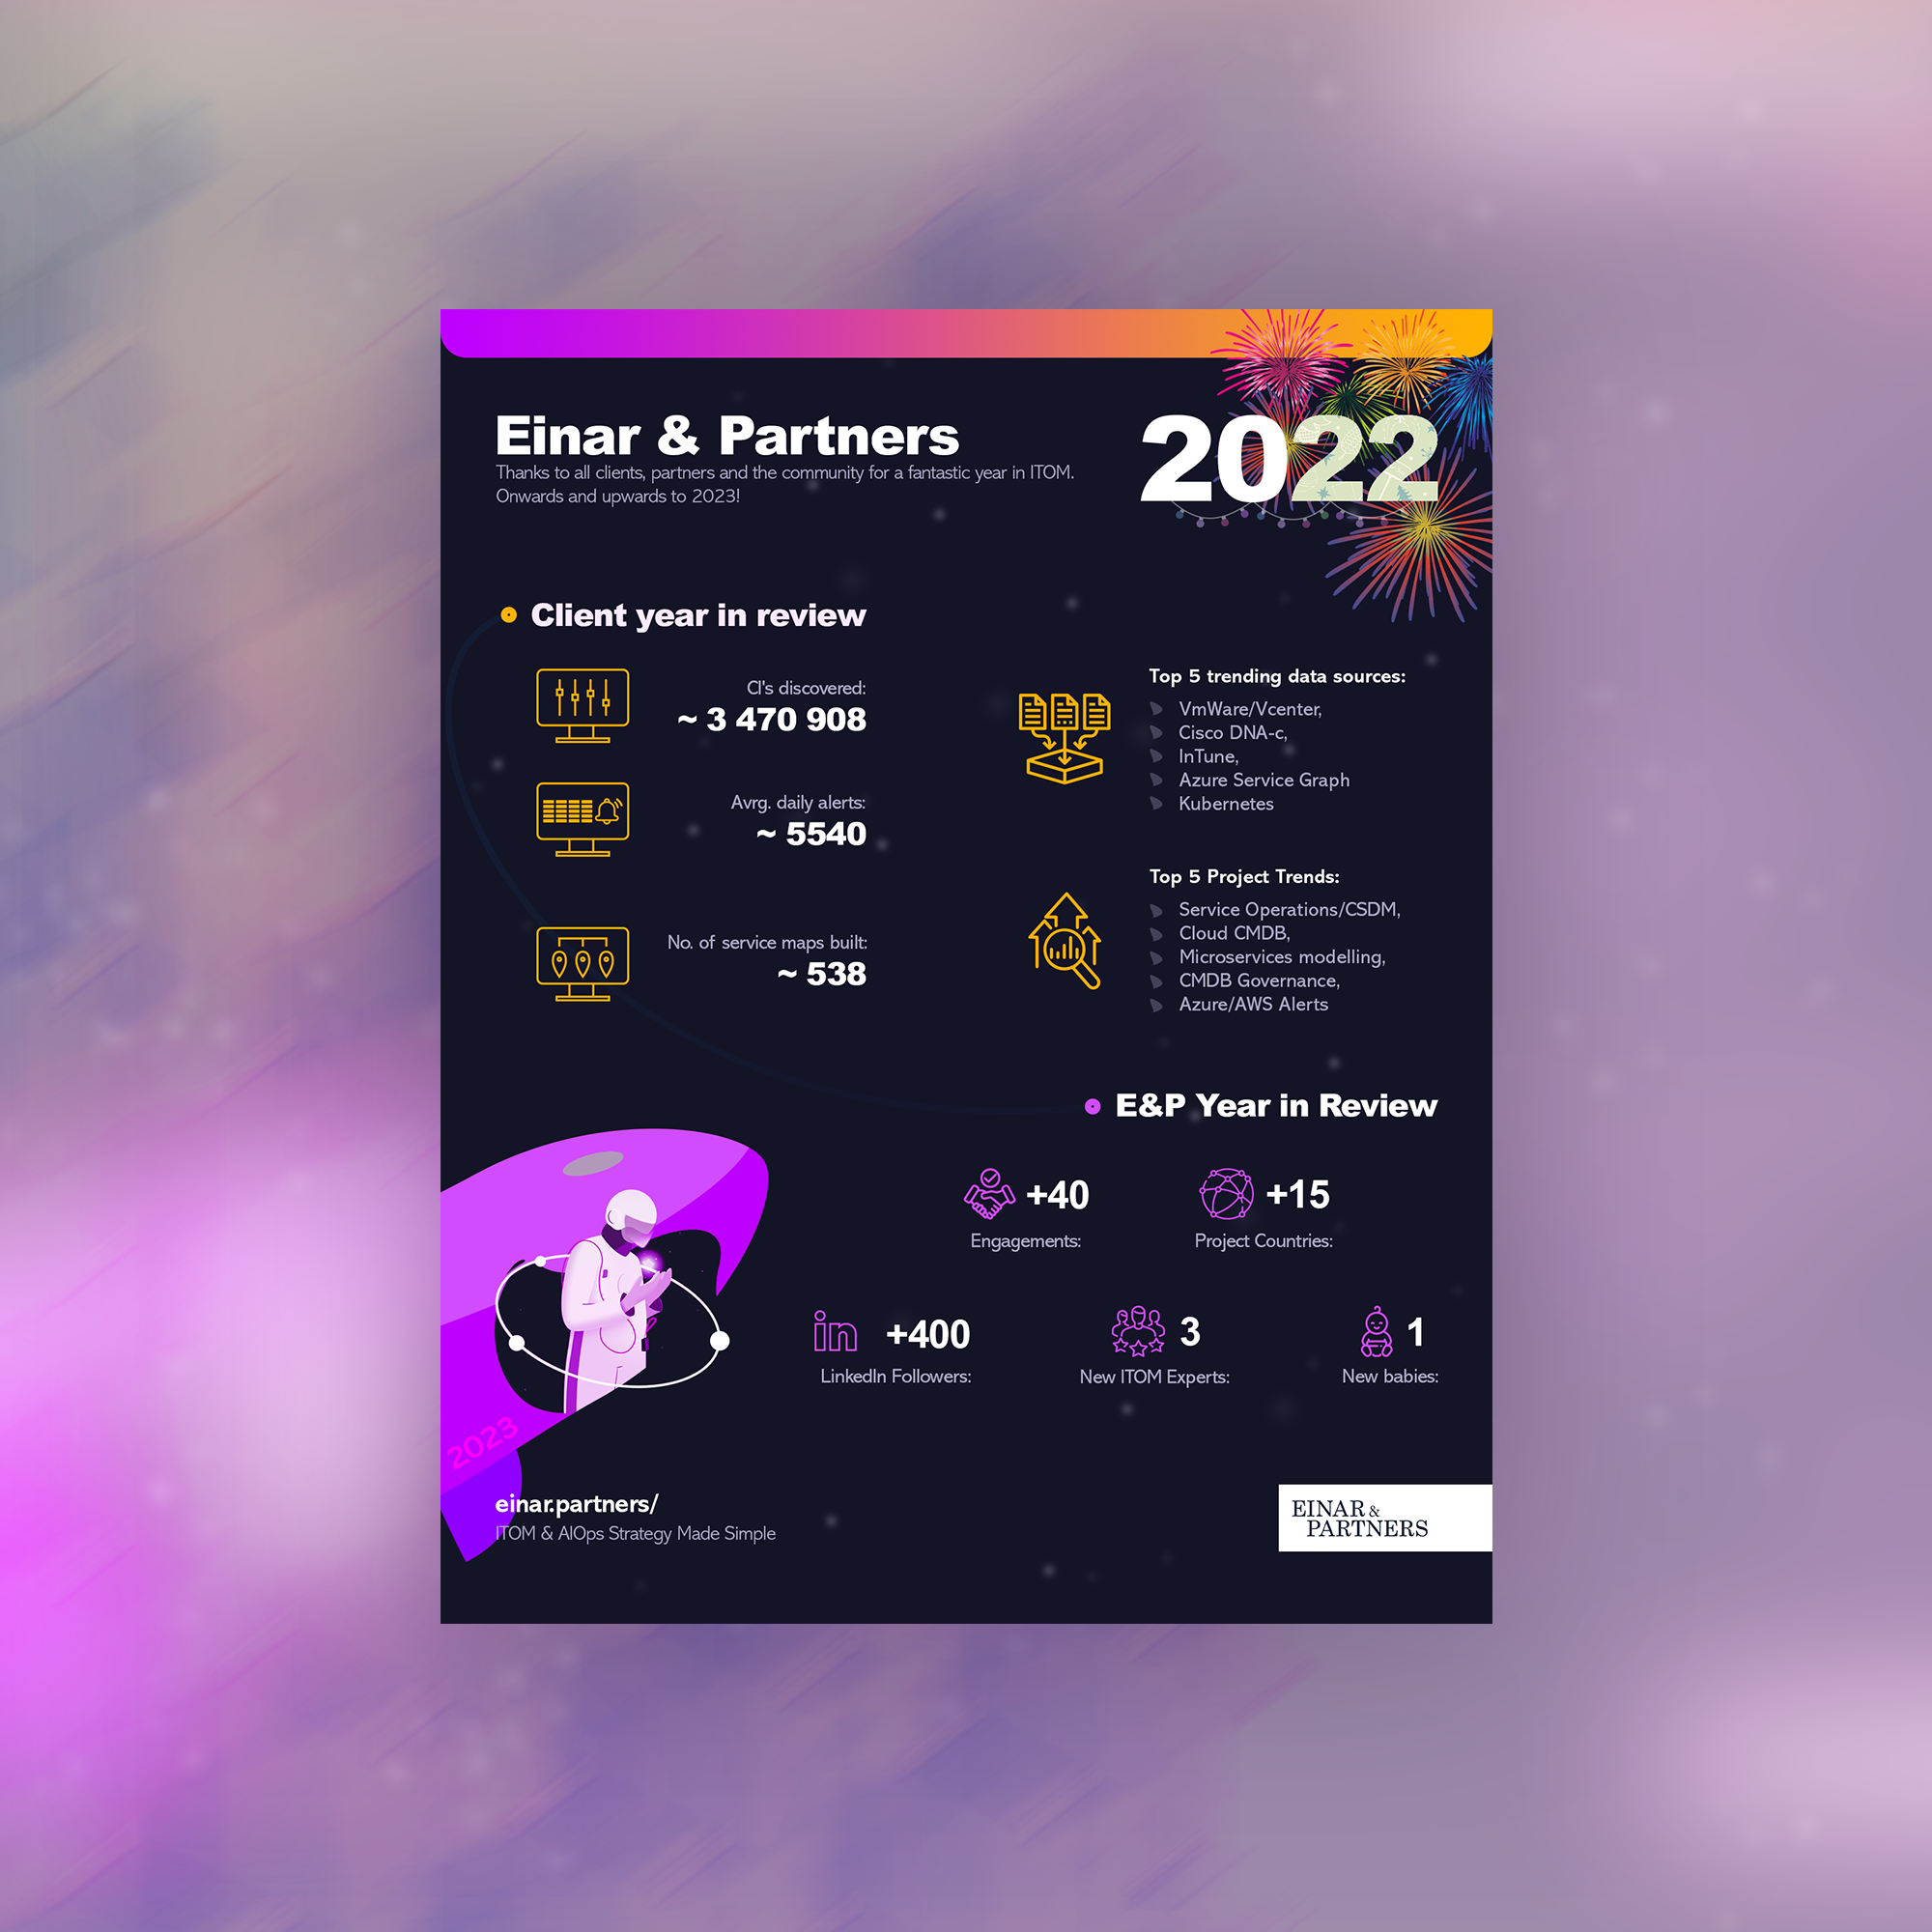 Einar&Partners in 2022 Infographic